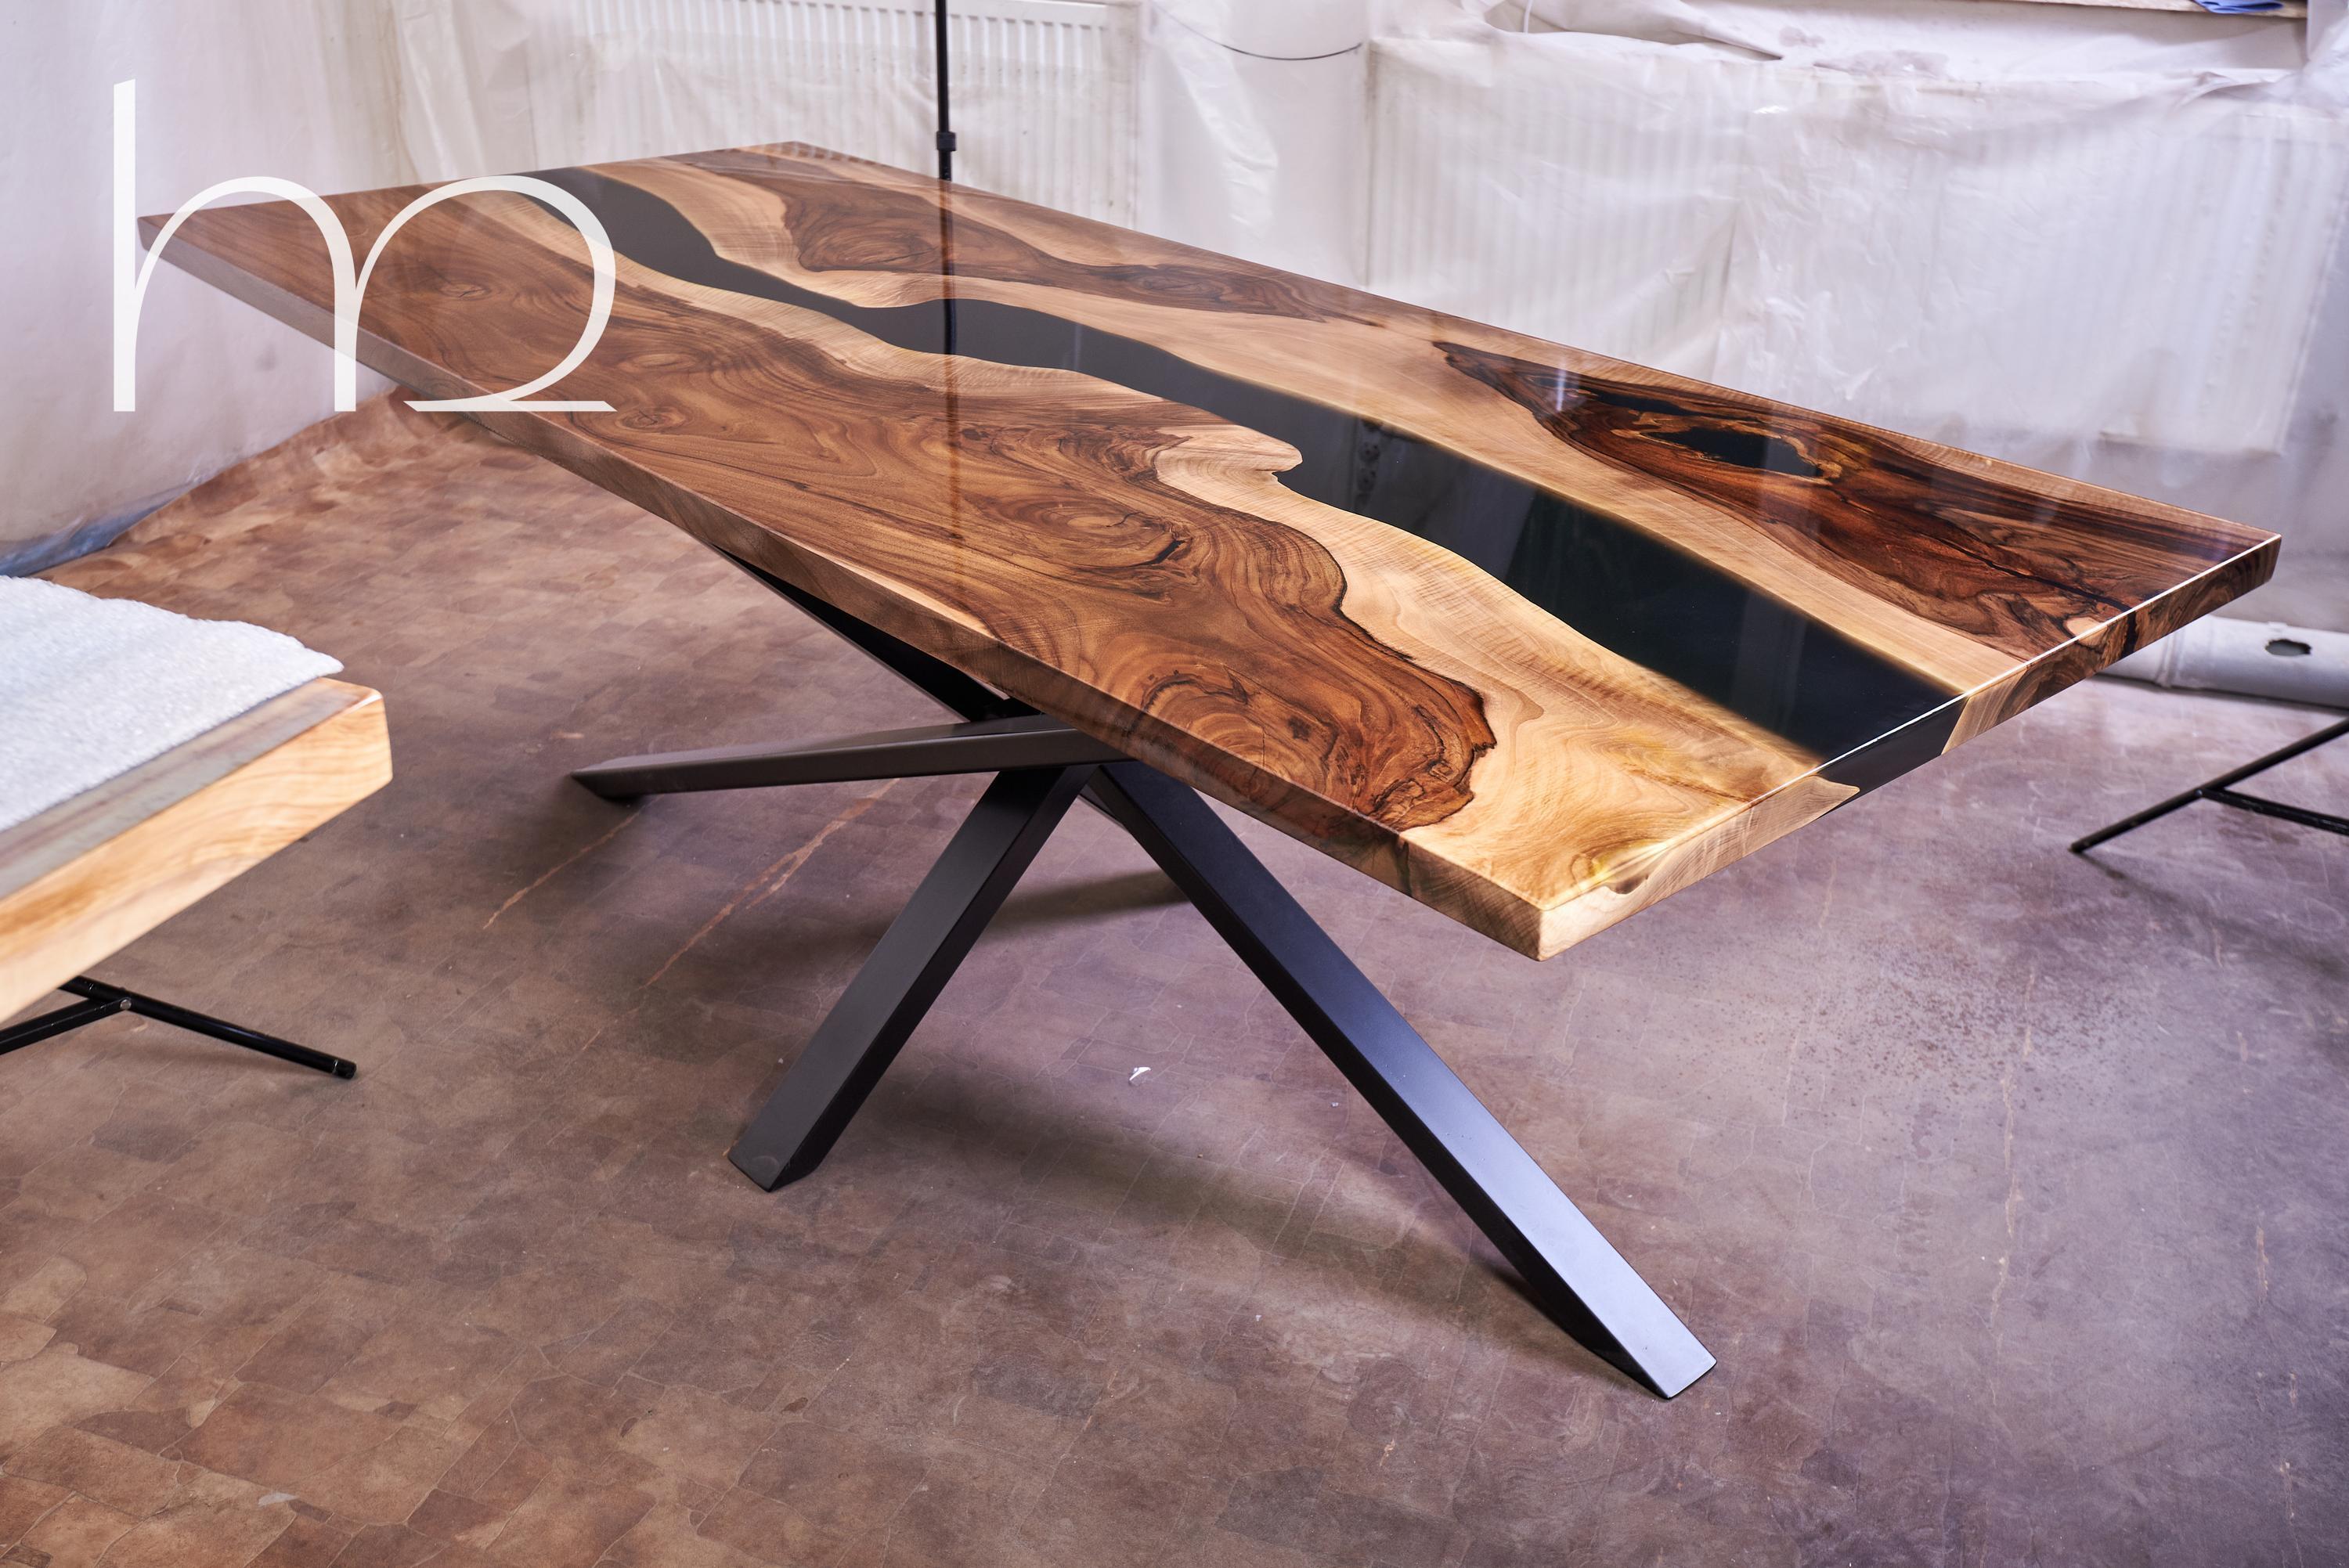 resin tables for sale